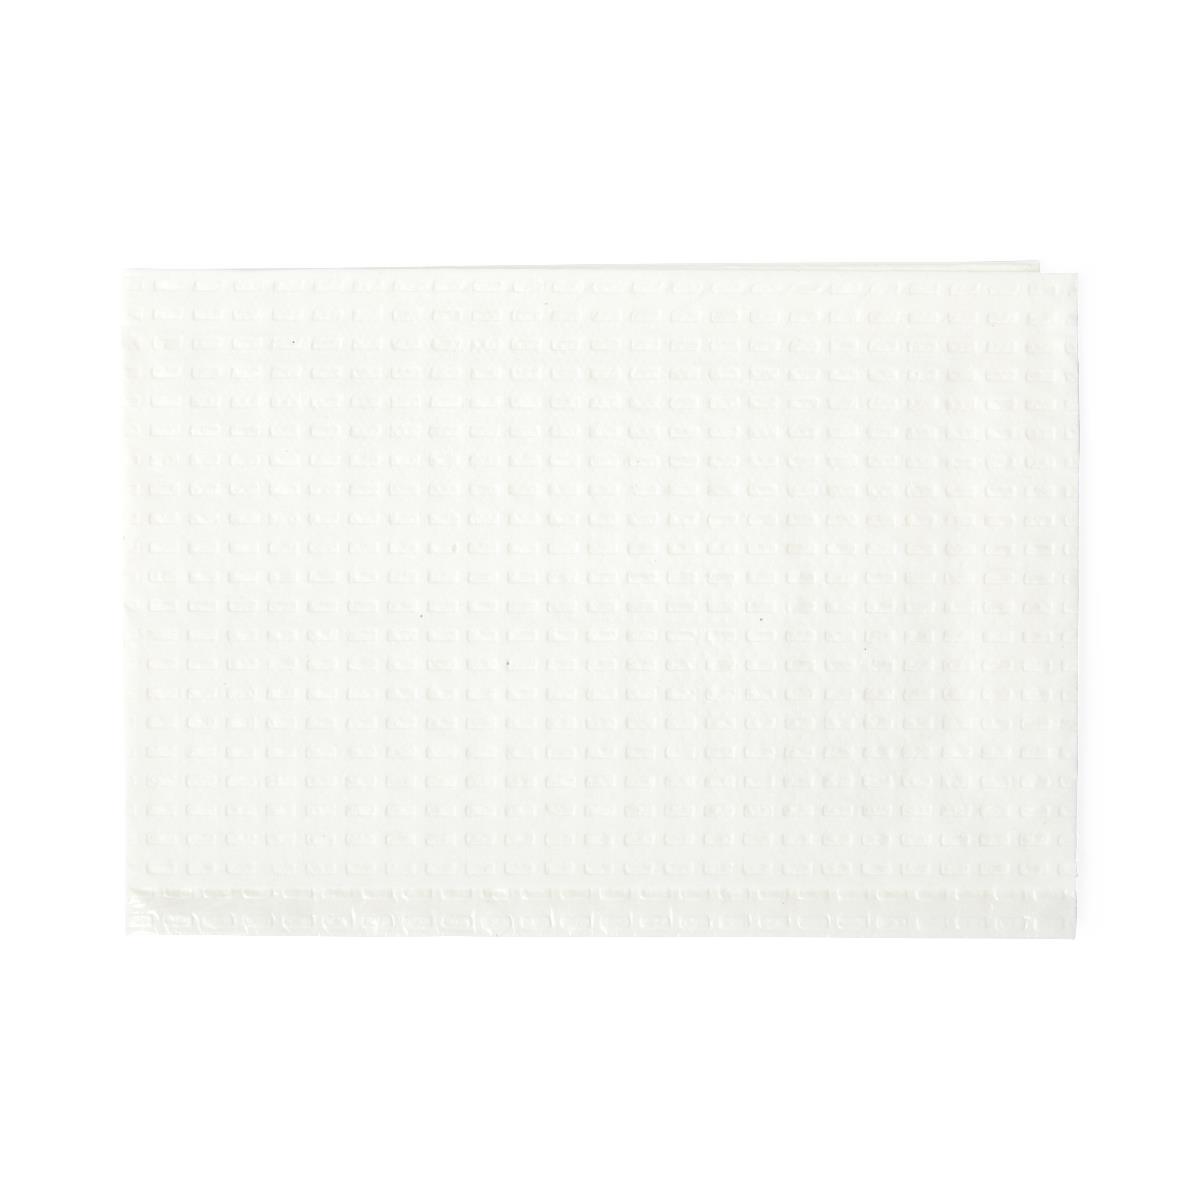 2-Ply Tissue/Poly Professional Towels,White Case of 500